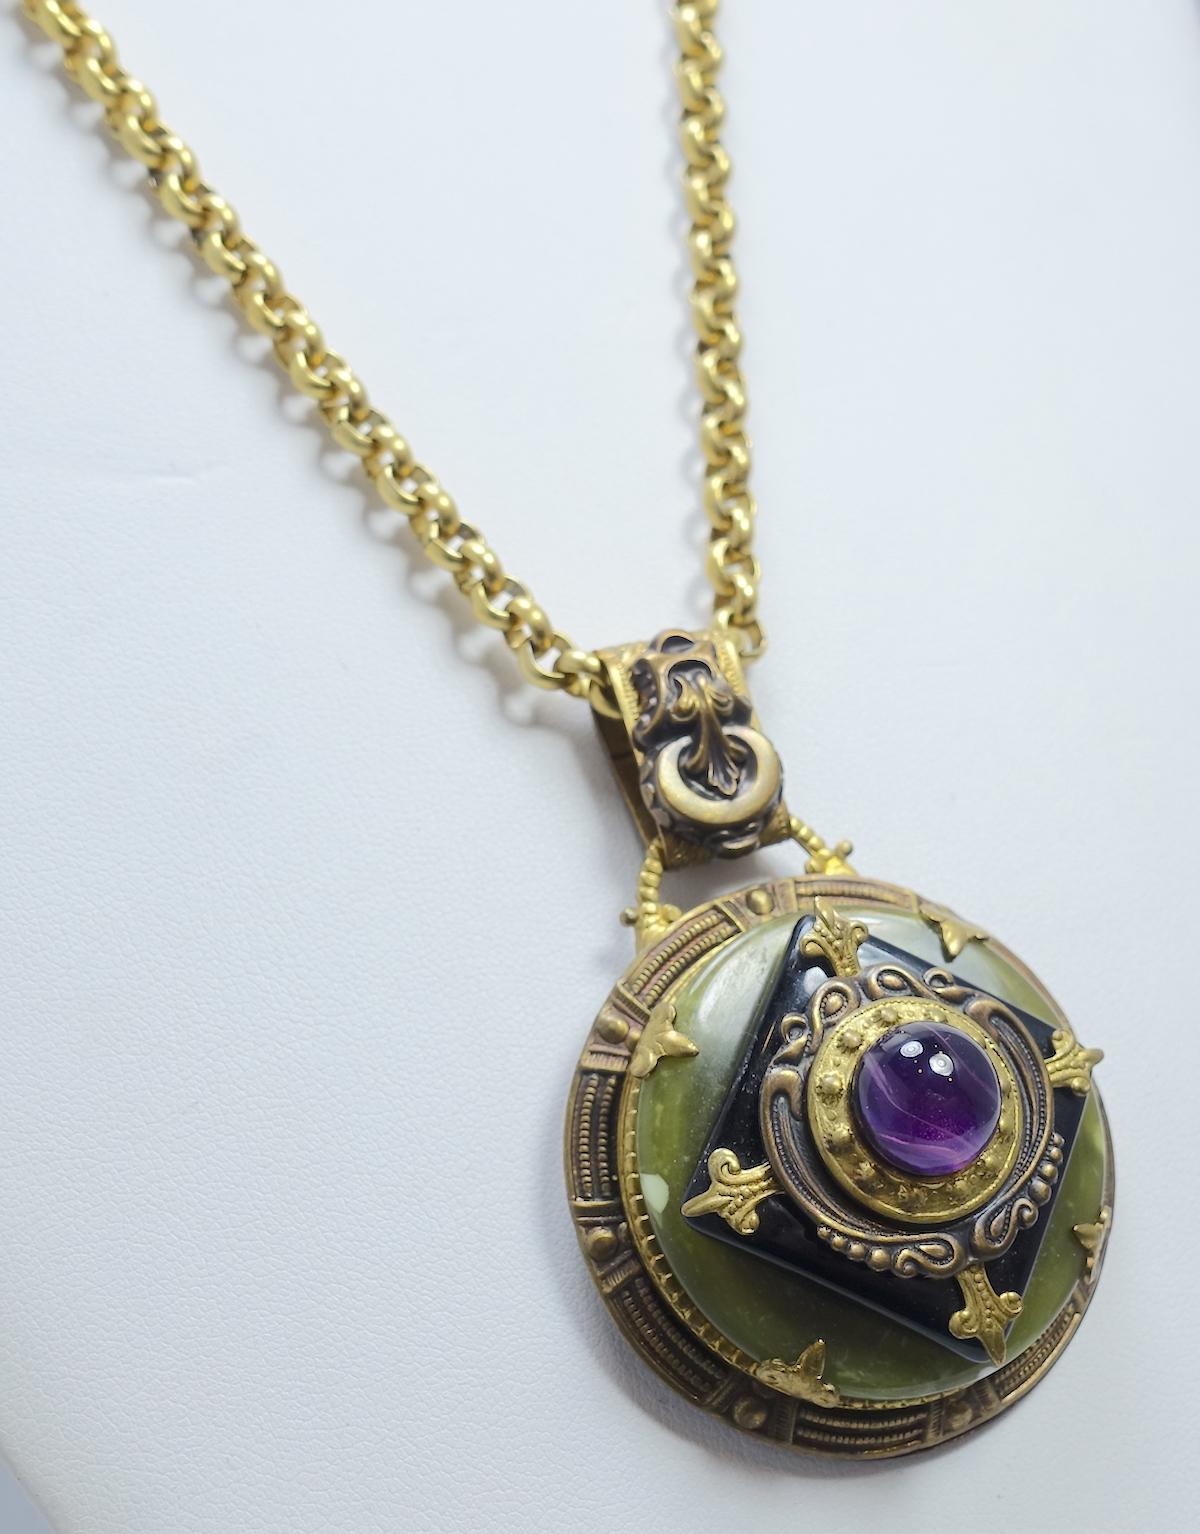 This vintage art deco pendant necklace features a large center amethyst stone in a 3-dimensional black and green stone design in a gold tone setting.  In excellent condition, the pendant measures 2-1/2” x 1-3/4”; the gold-tone link chain is 32” x